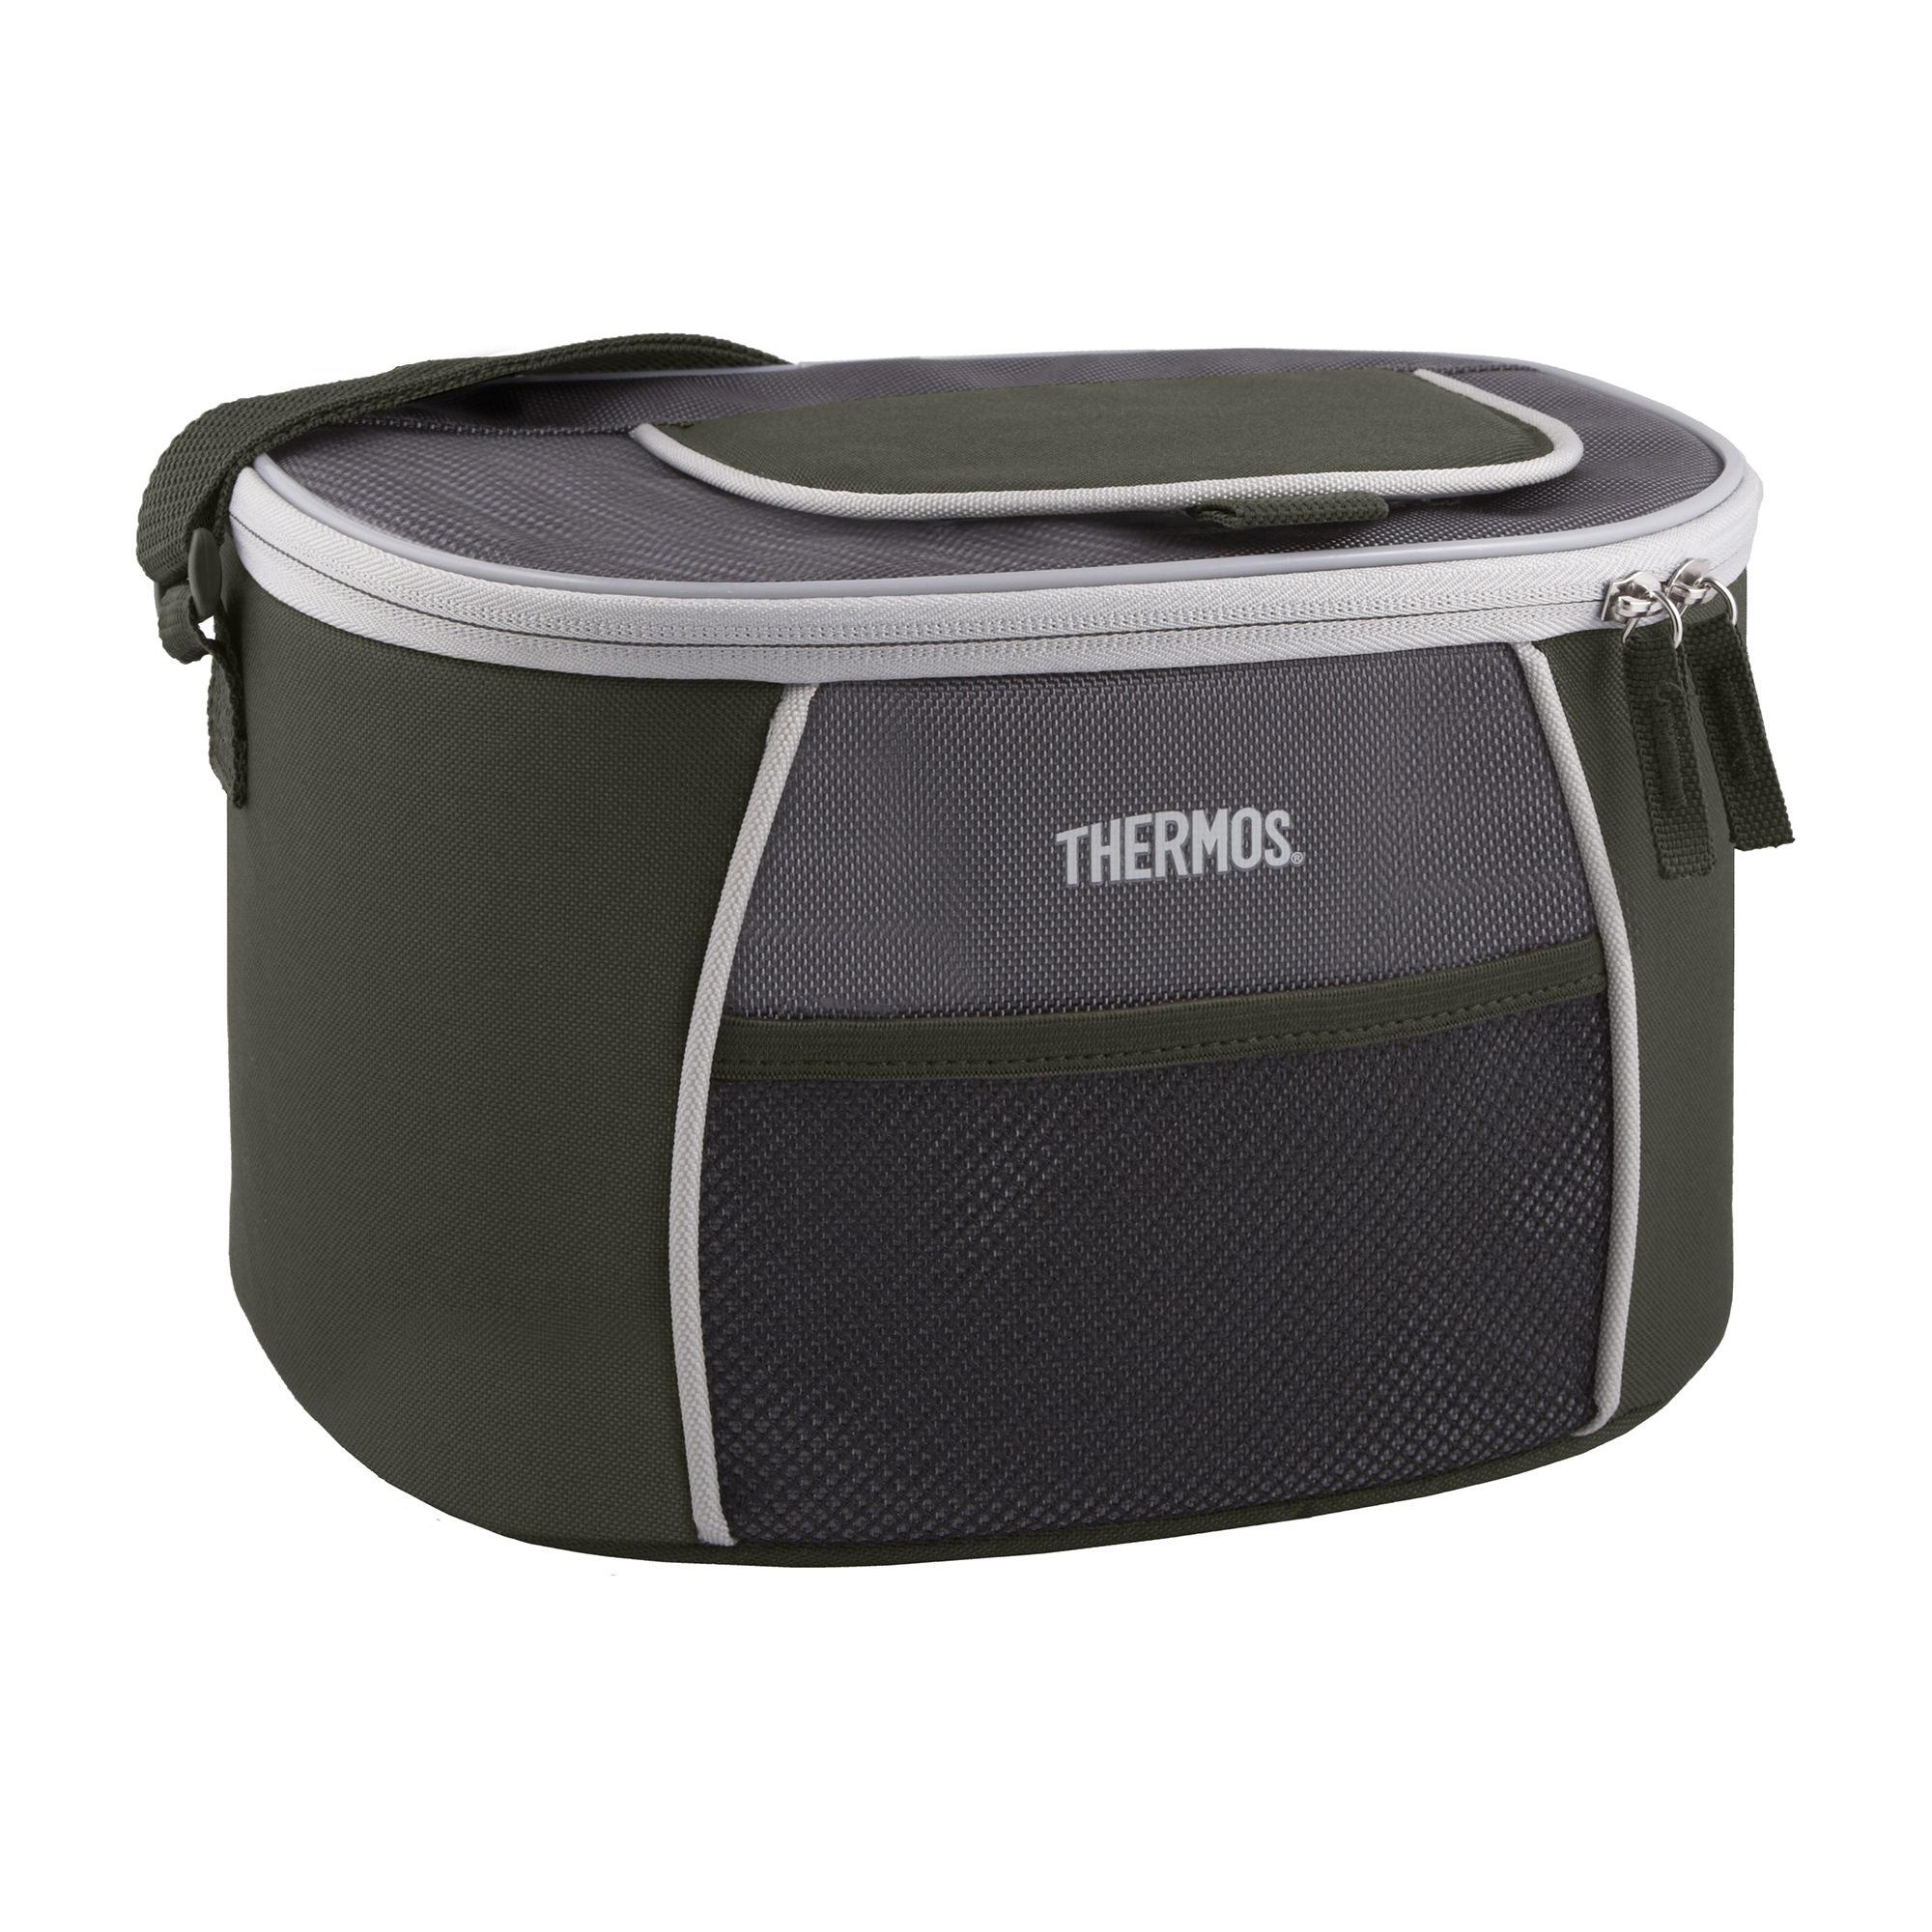 Thermos E5 Insulated Cooler Bag 12 Can Image 1